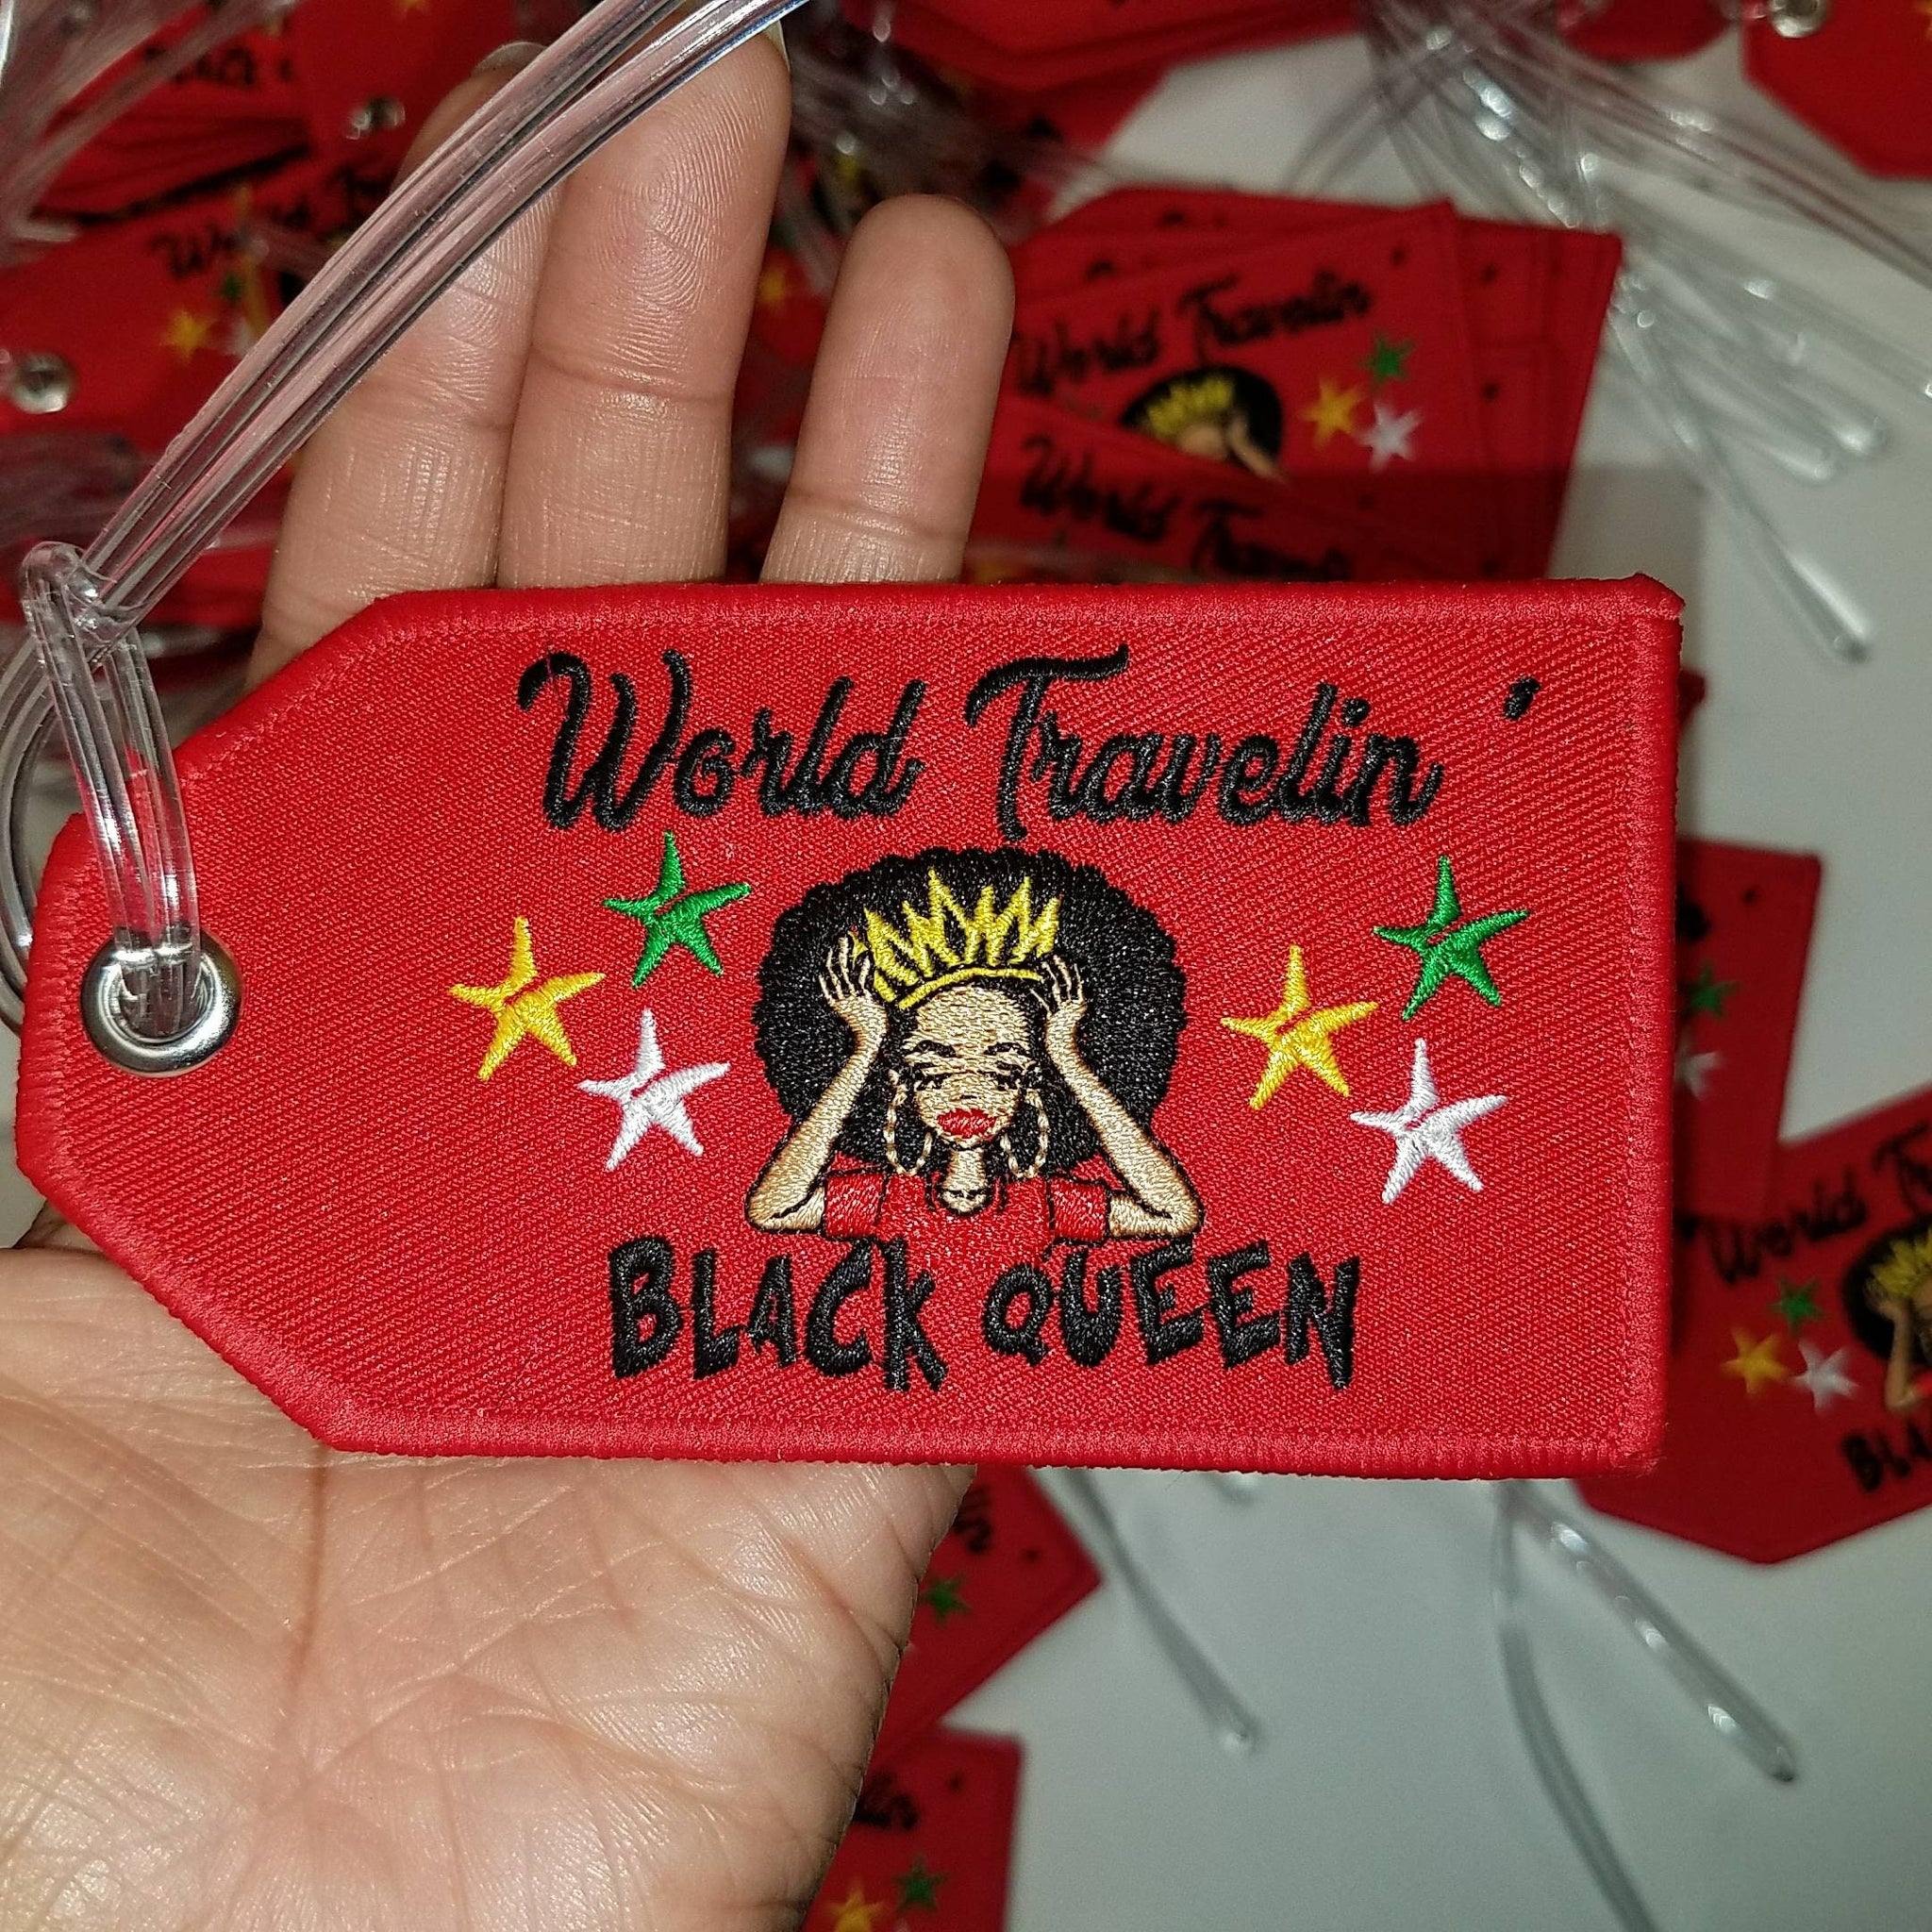 Red Luggage Tag, "World Travelin Black Queen", Bag Tags for Girls Trip, Travel Gifts for Woman, Group Bag Tags, Cute Luggage Tags for Travel